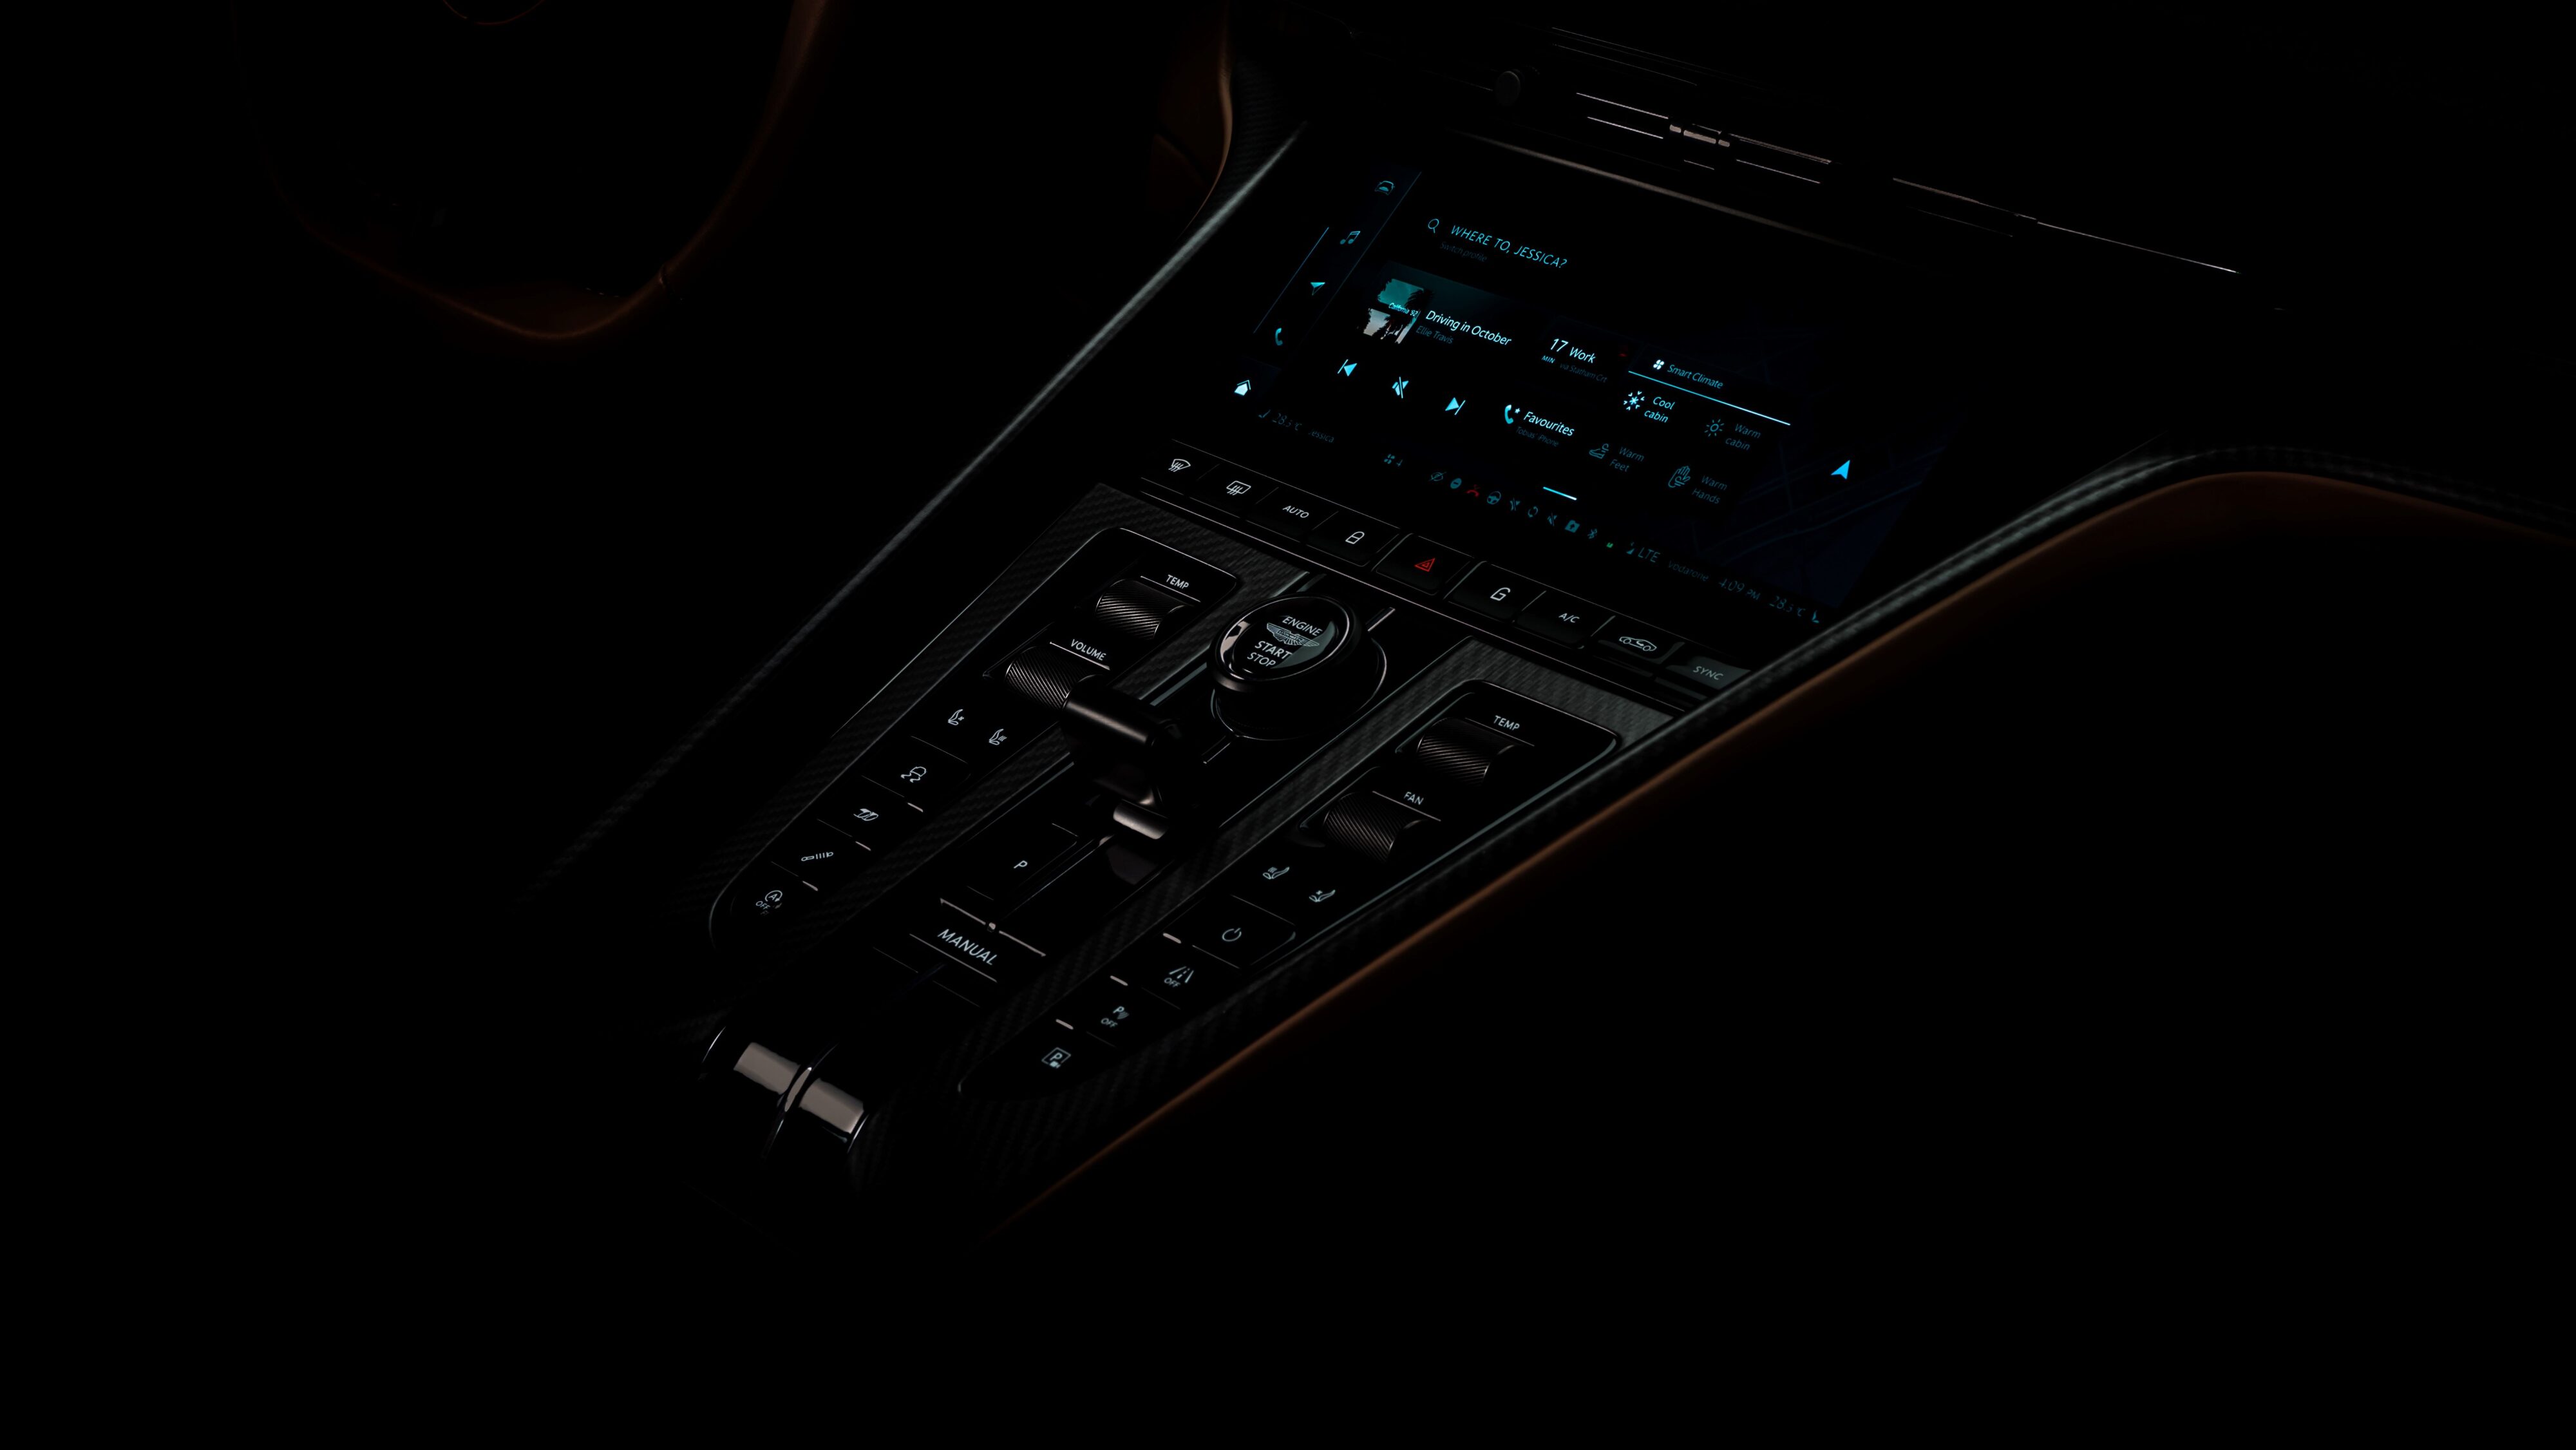 The technology on the centre console in focus on the new Aston Martin DB car